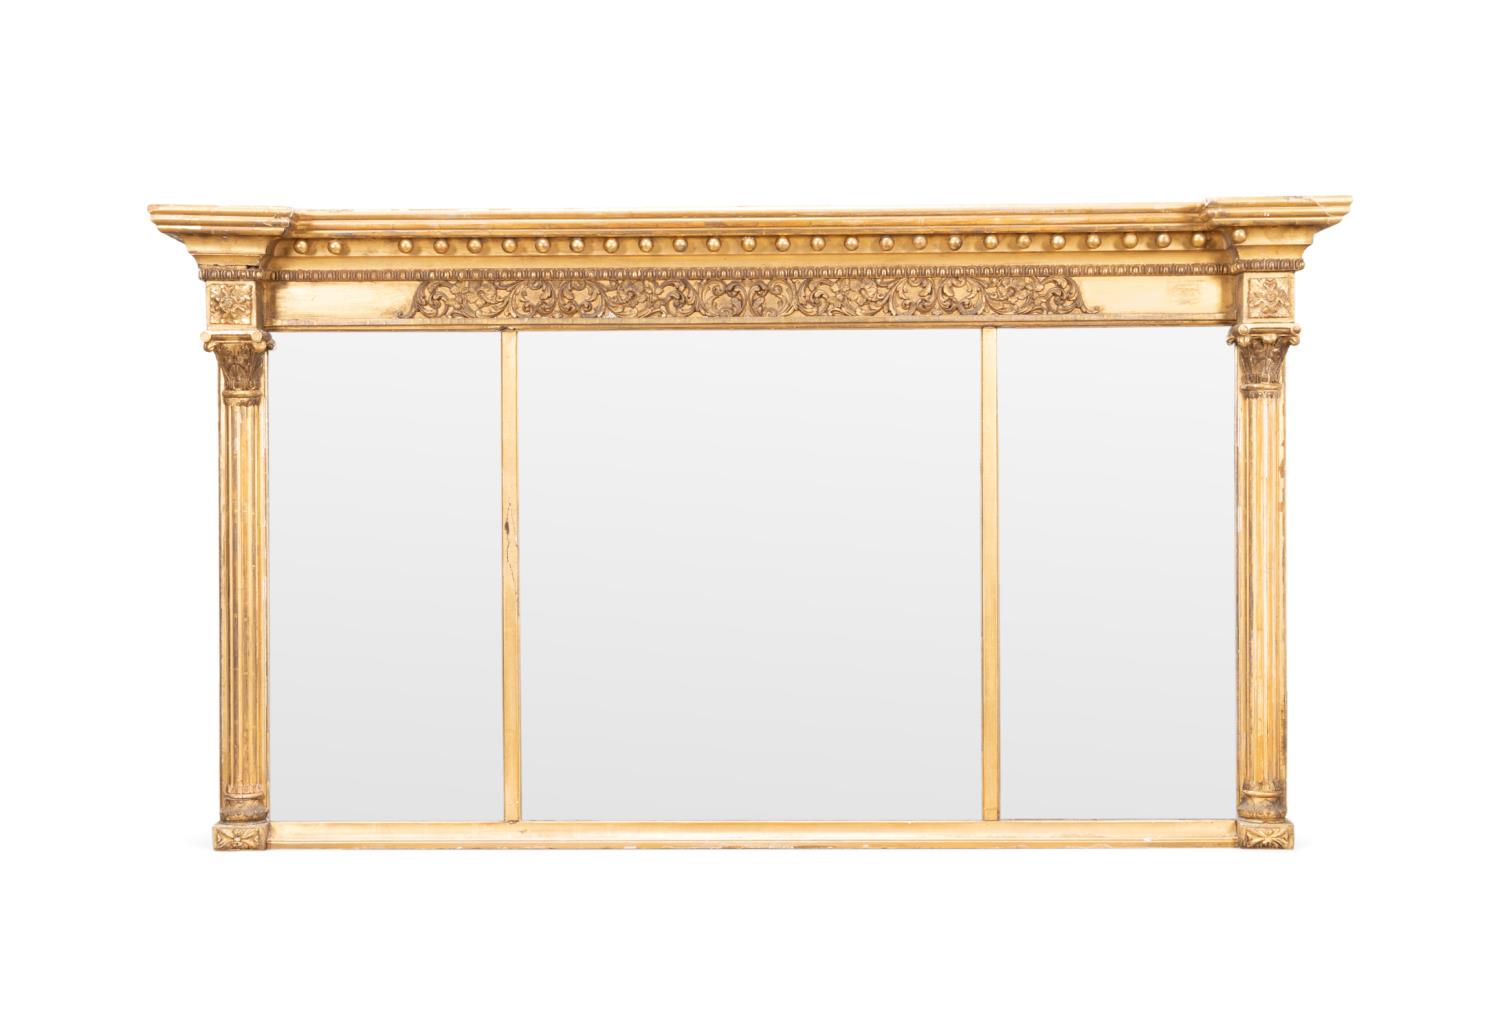 19TH C. NEOCLASSICAL GILTWOOD OVERMANTEL